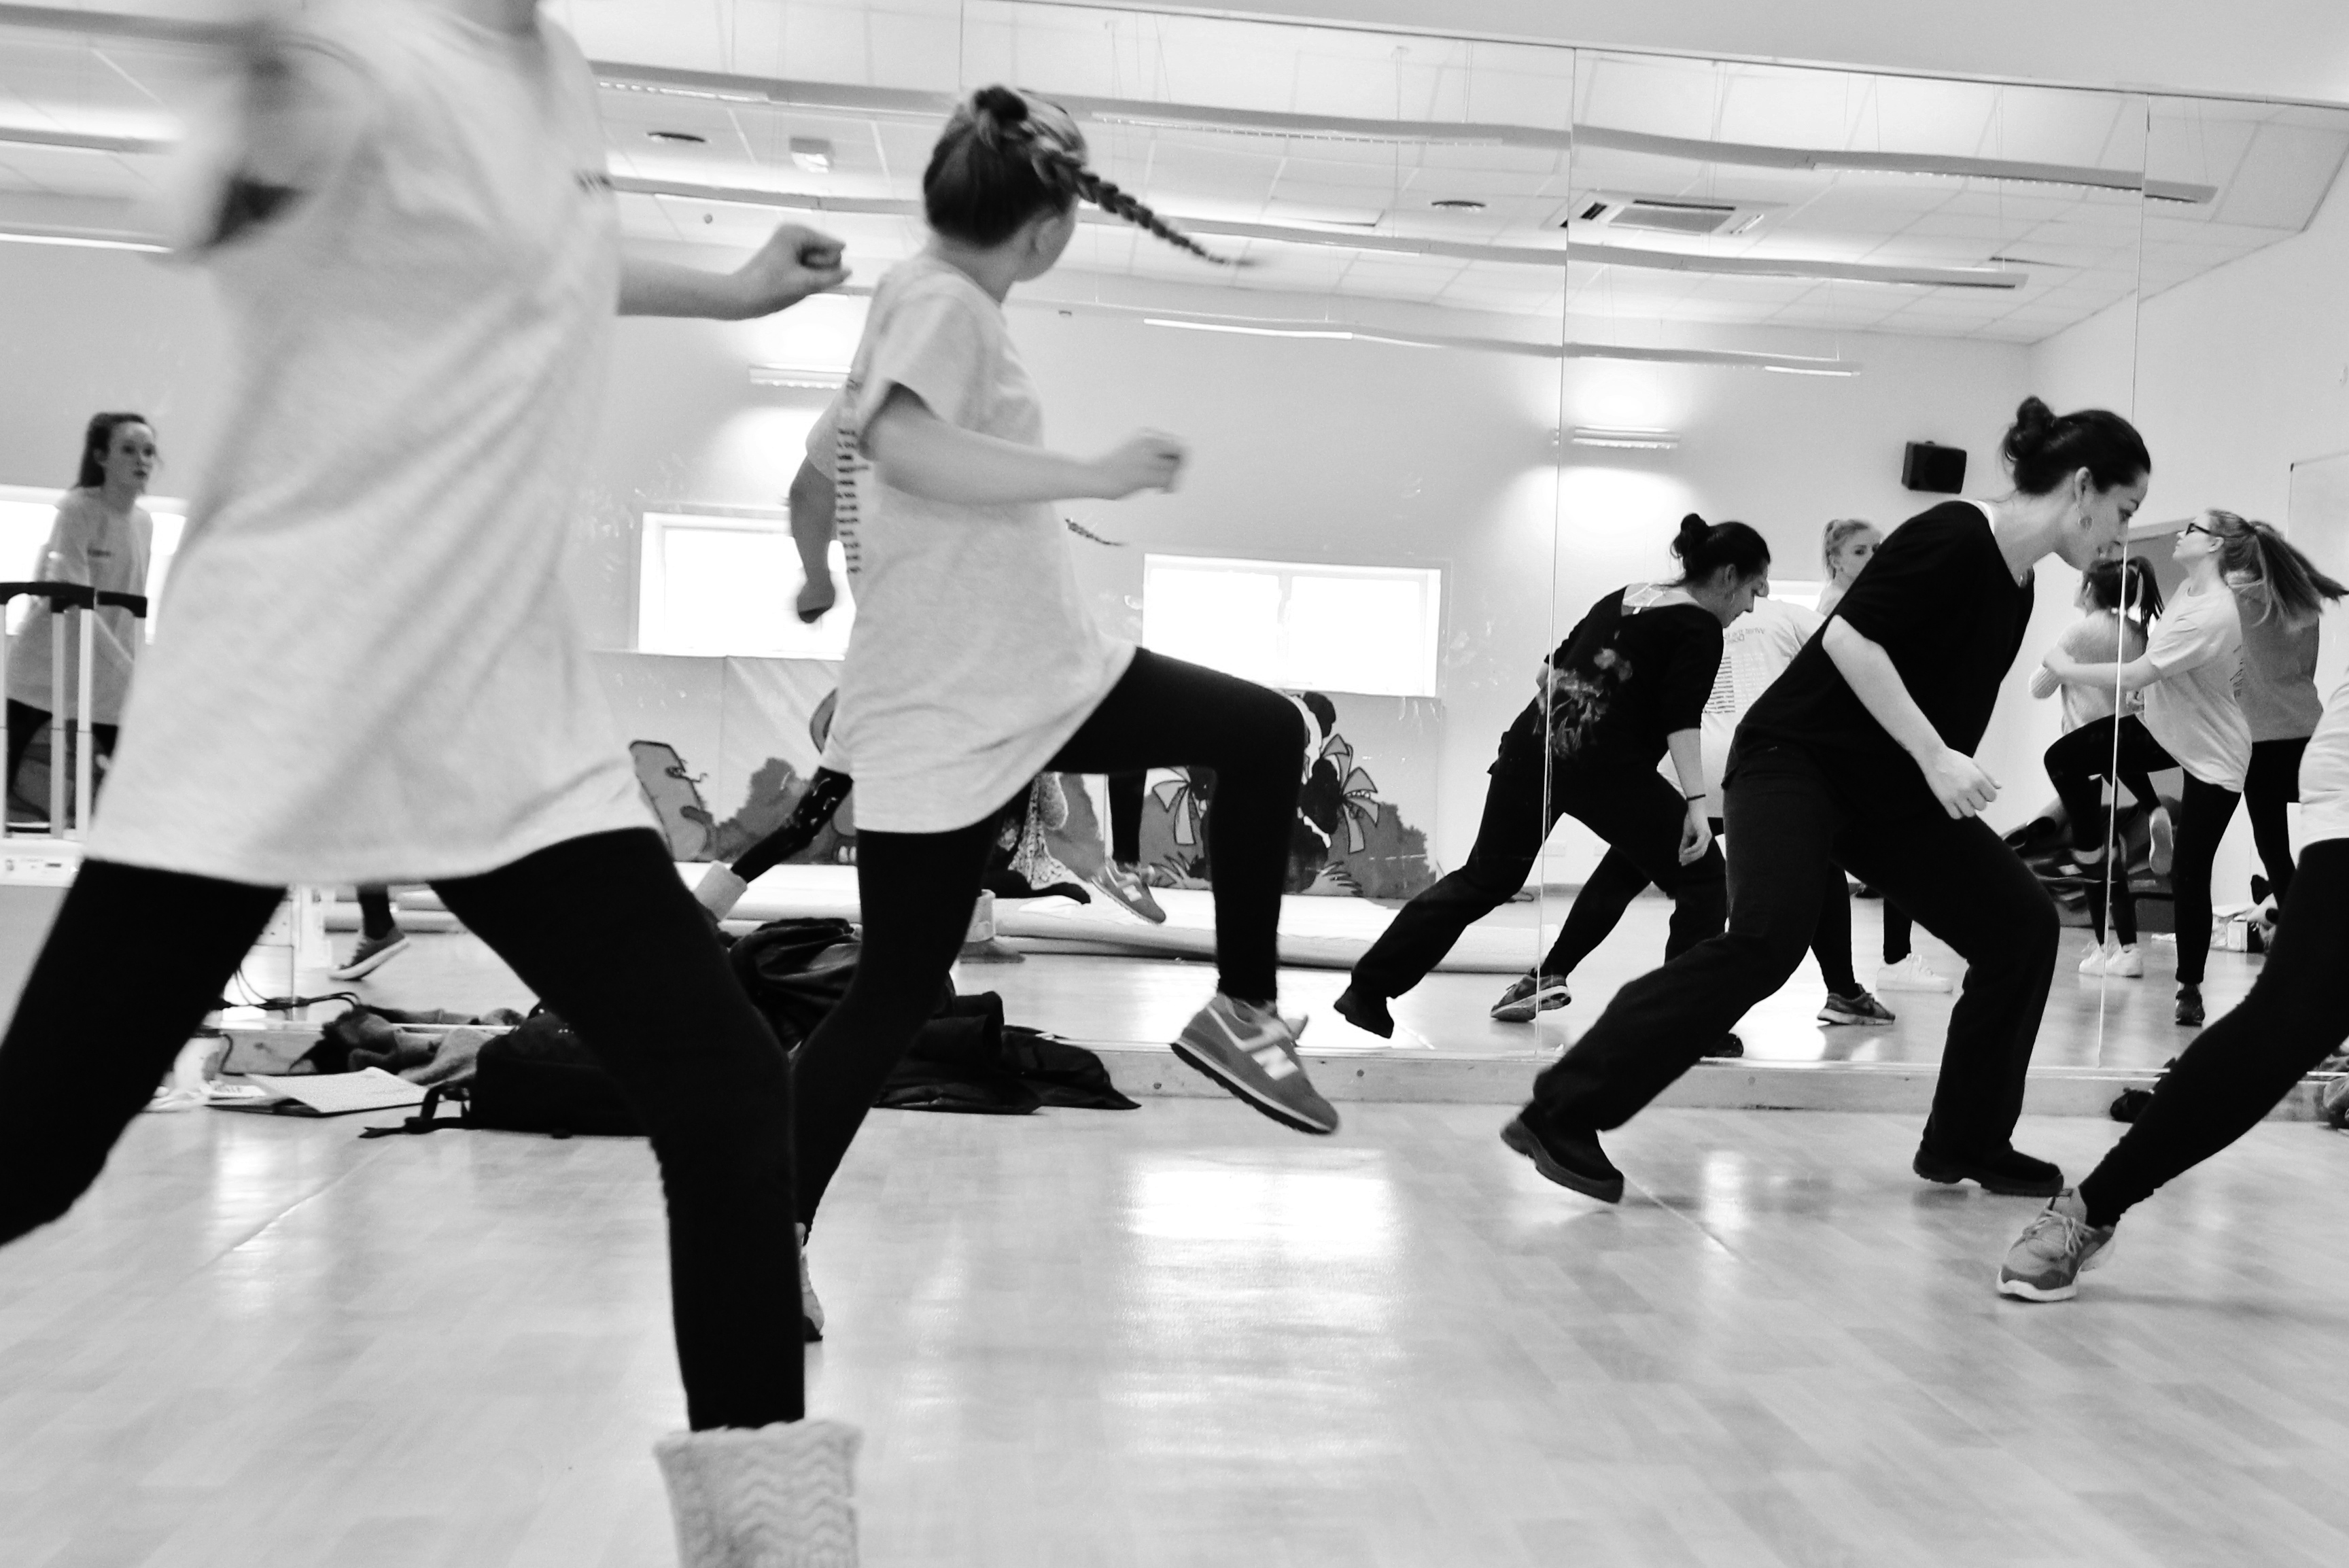 Nadia Iftkhar running a youth dance class. In the foreground, there are two dancers jumping, with their legs bent, spinning. Nadia is in the background, lunging forward. They are dancing in front of a studio mirror, in which you can see more dancers rehearsing.